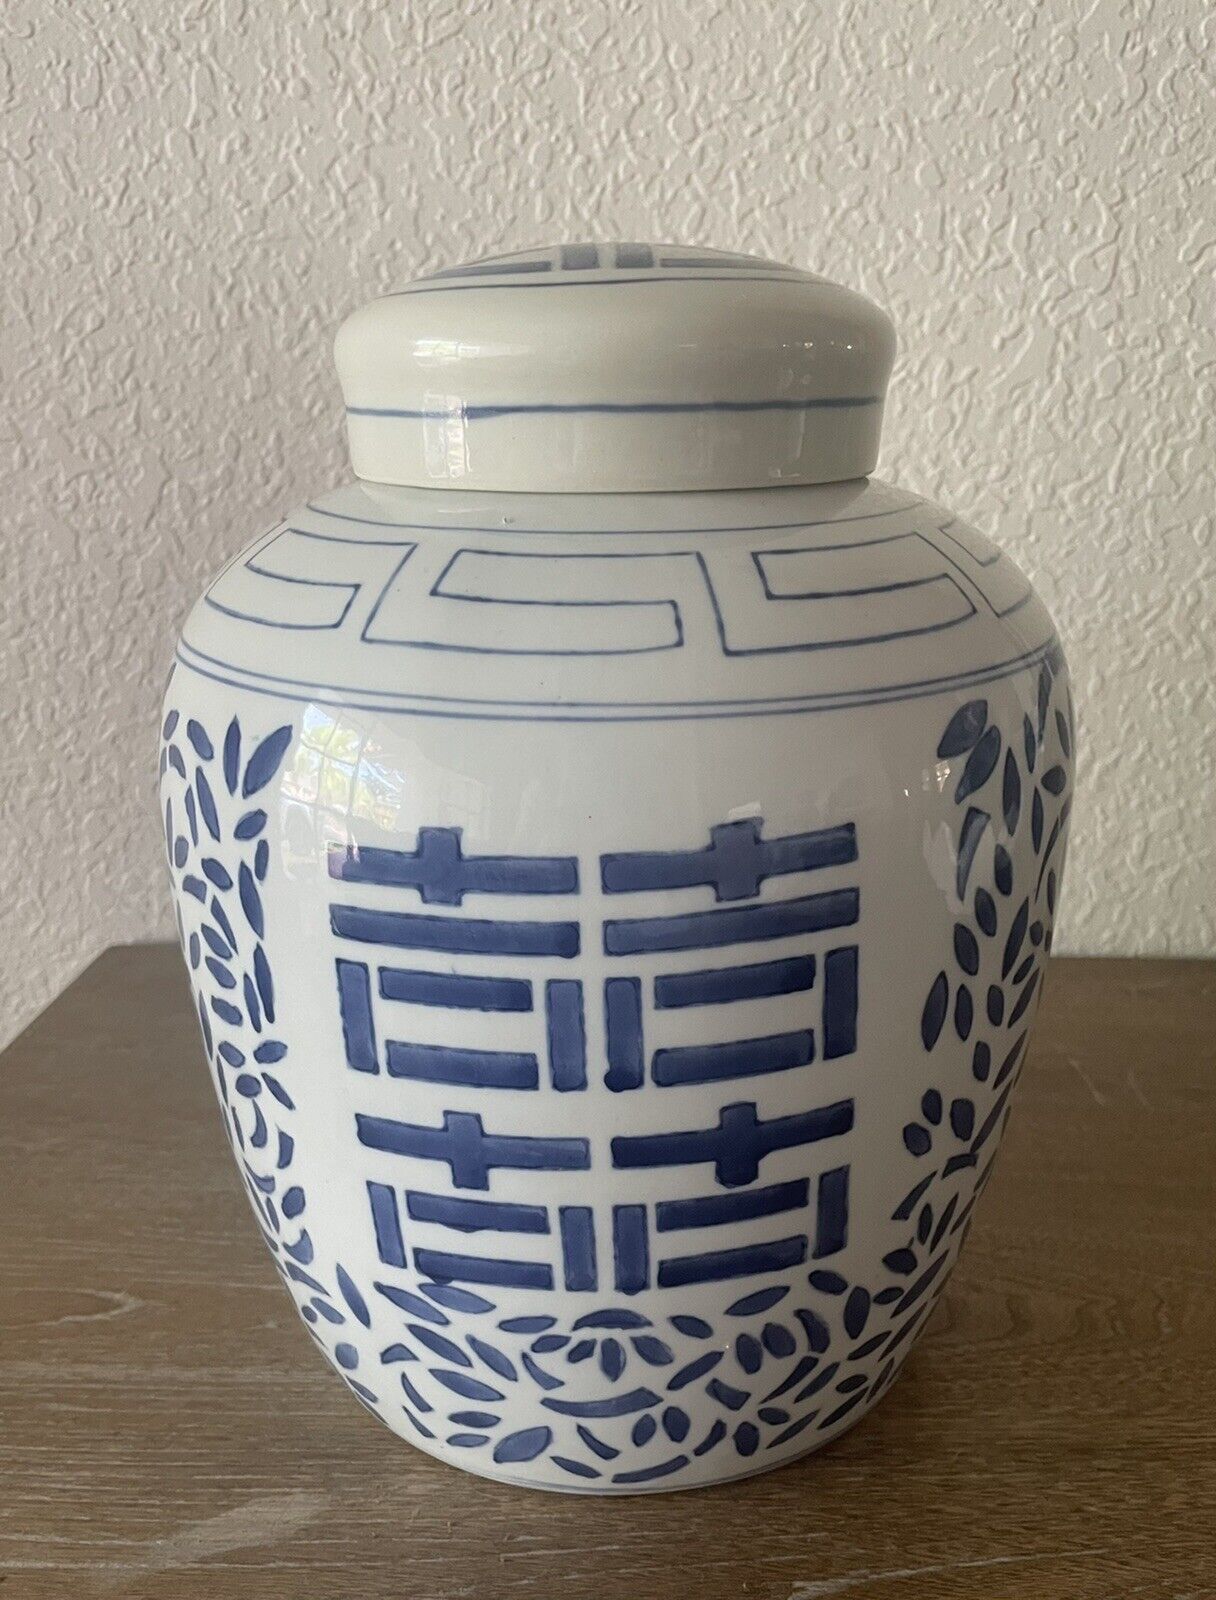 Vintage Double Happiness Chinese Ginger Jar blue and white Porcelain chinoiserie